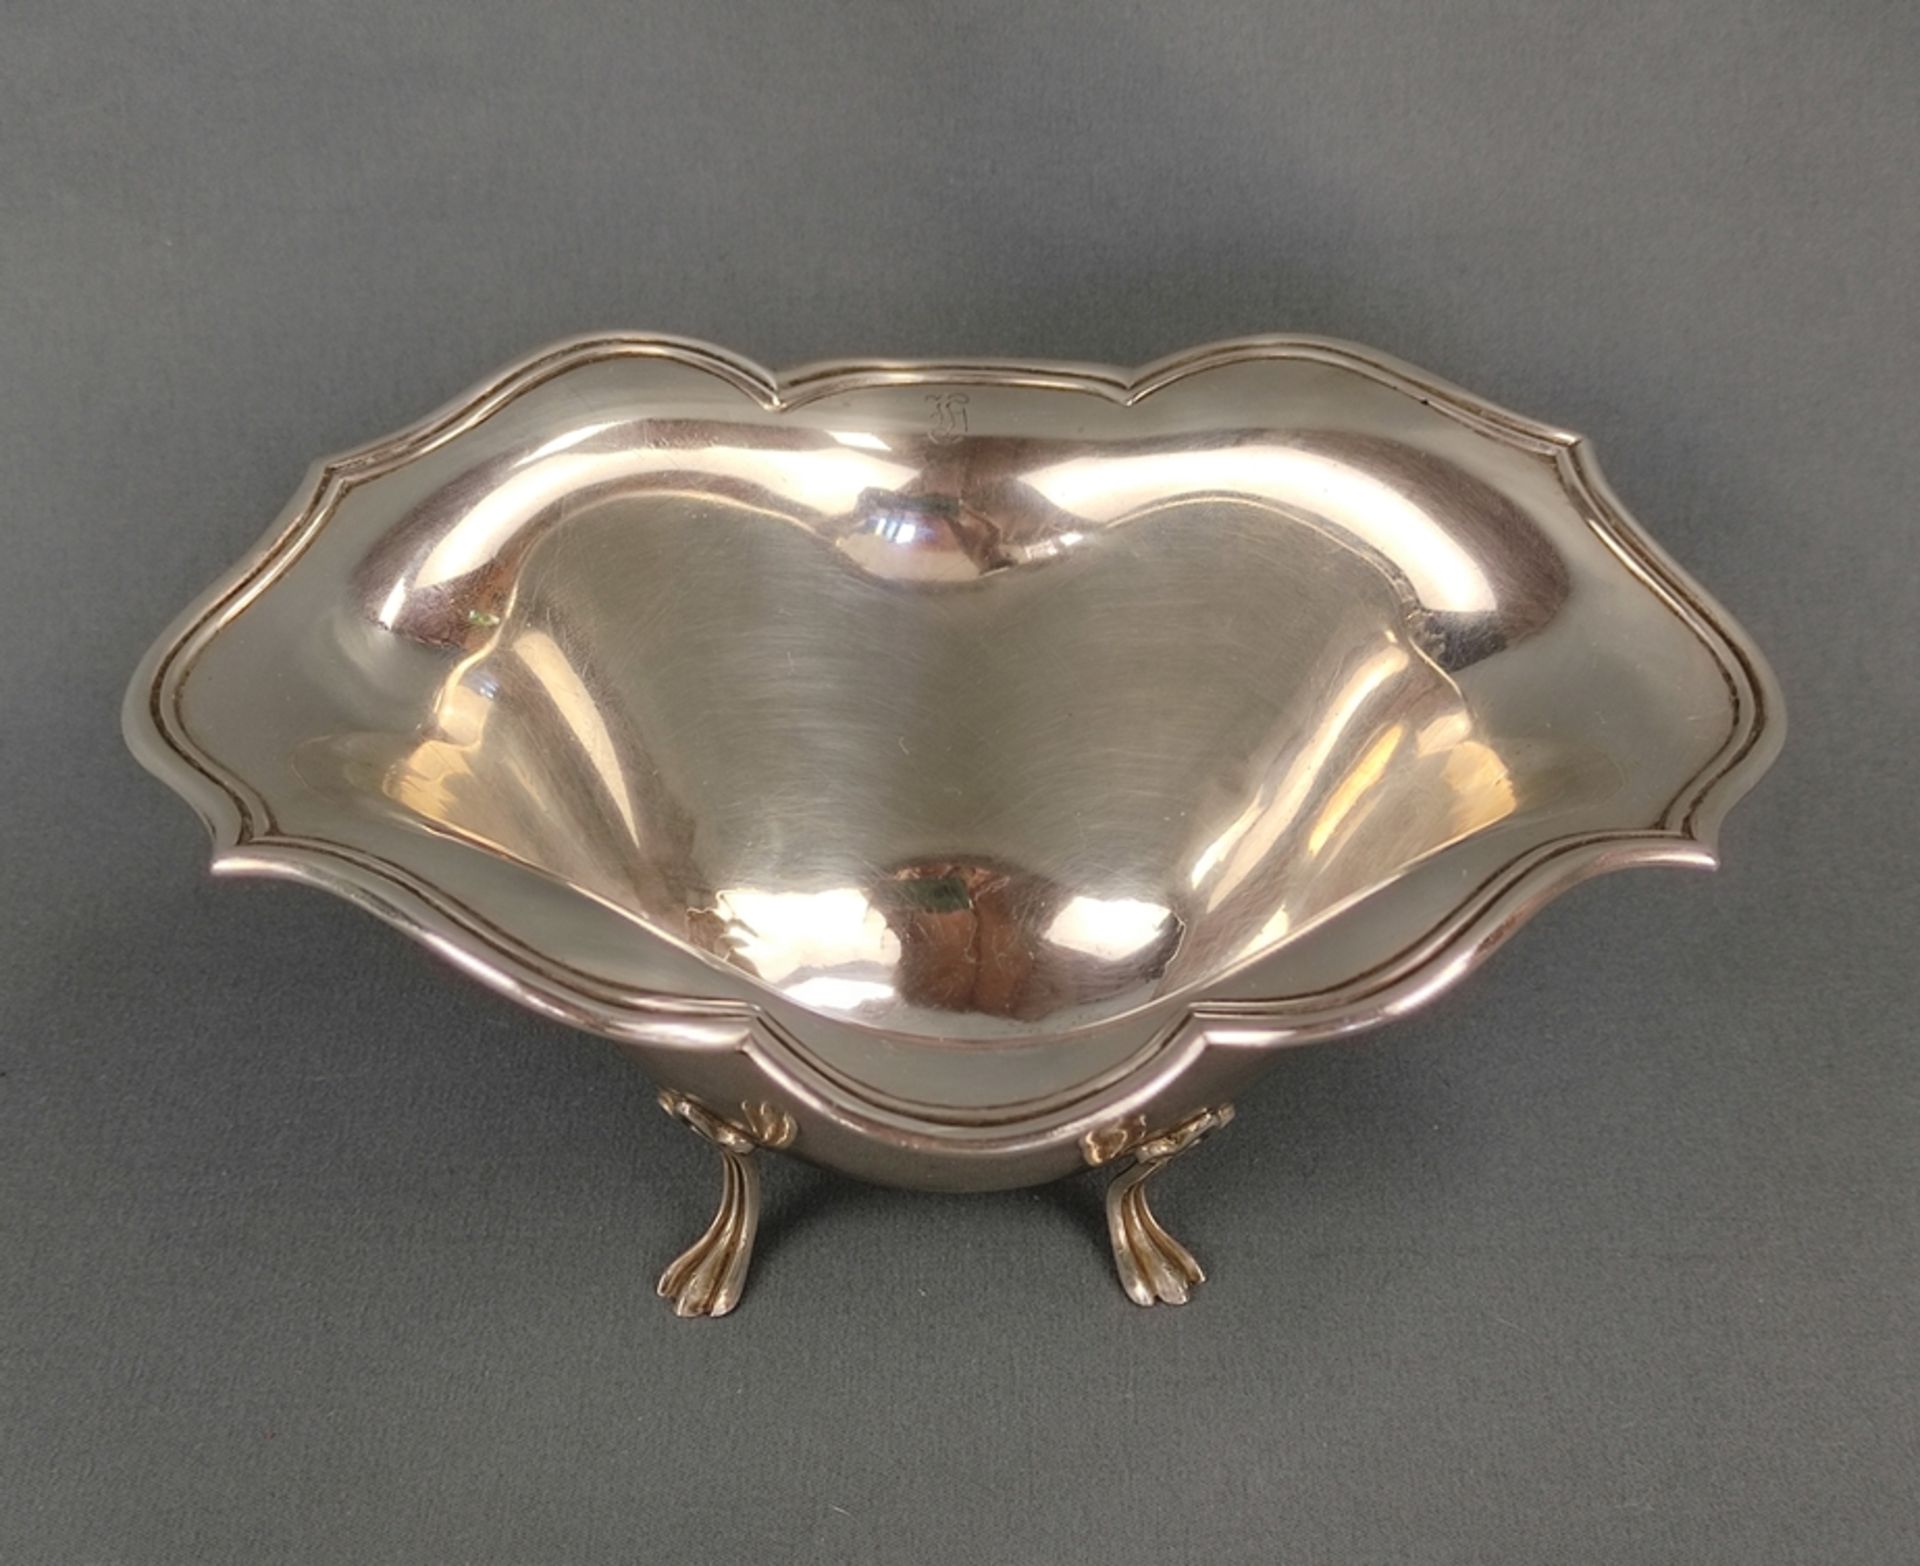 Footed bowl, sterling silver, 166g, on four curved feet, flared curved rims, with small engraved mo - Image 2 of 3